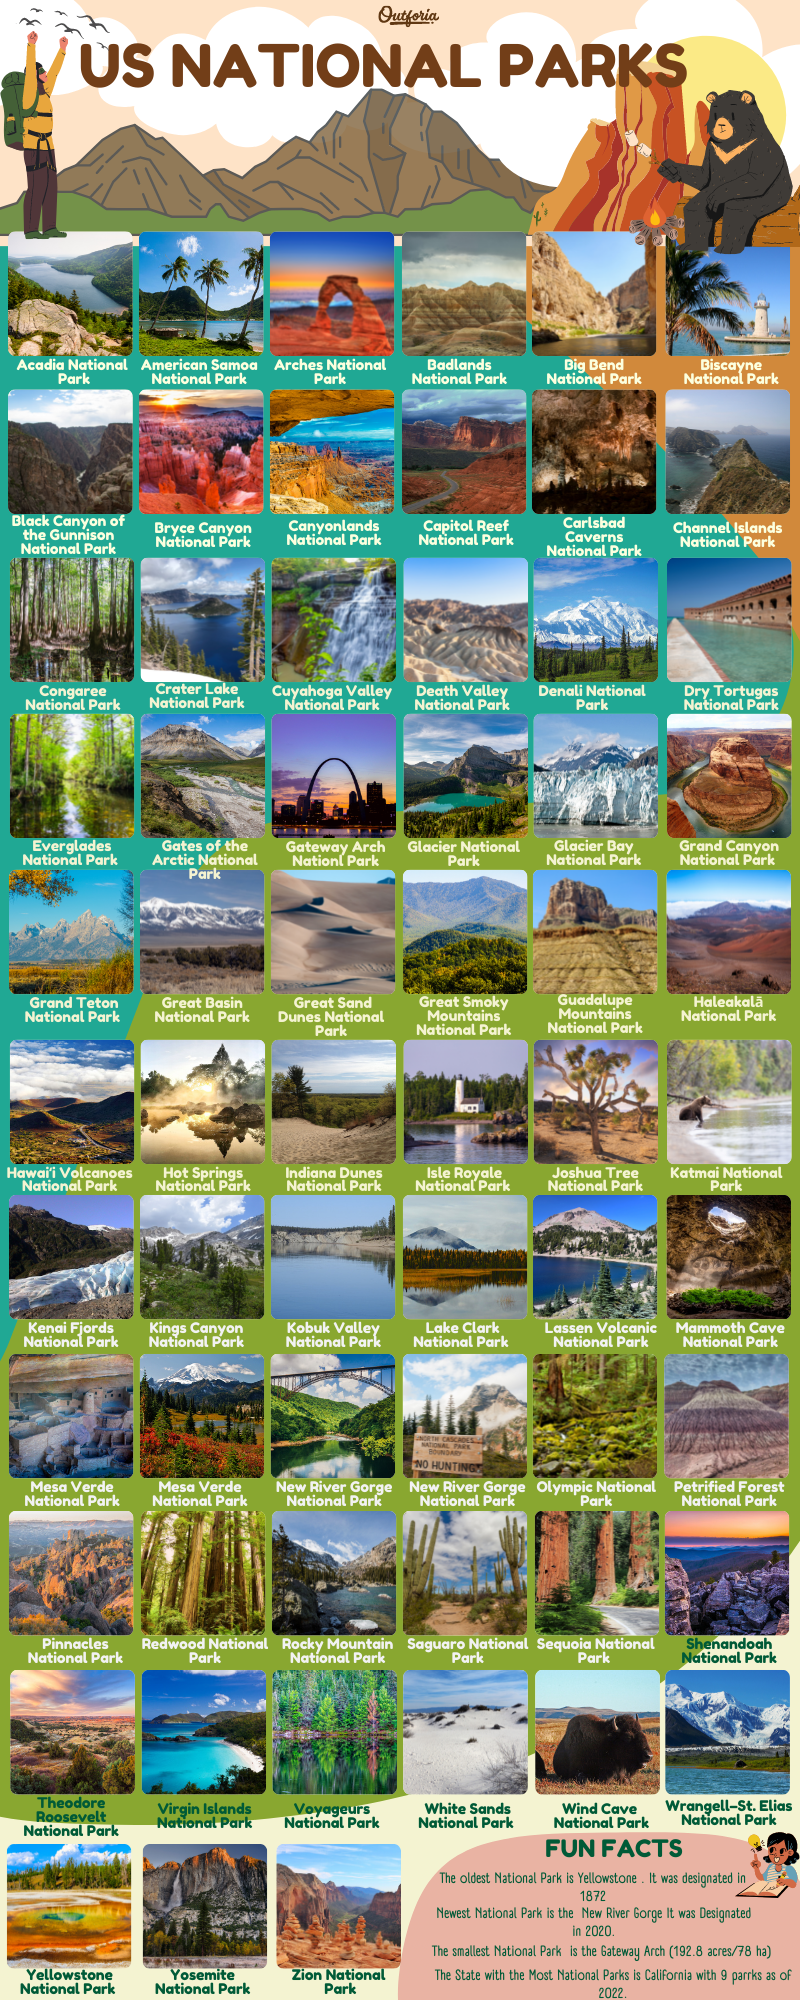 List of US National Parks chart of all parks